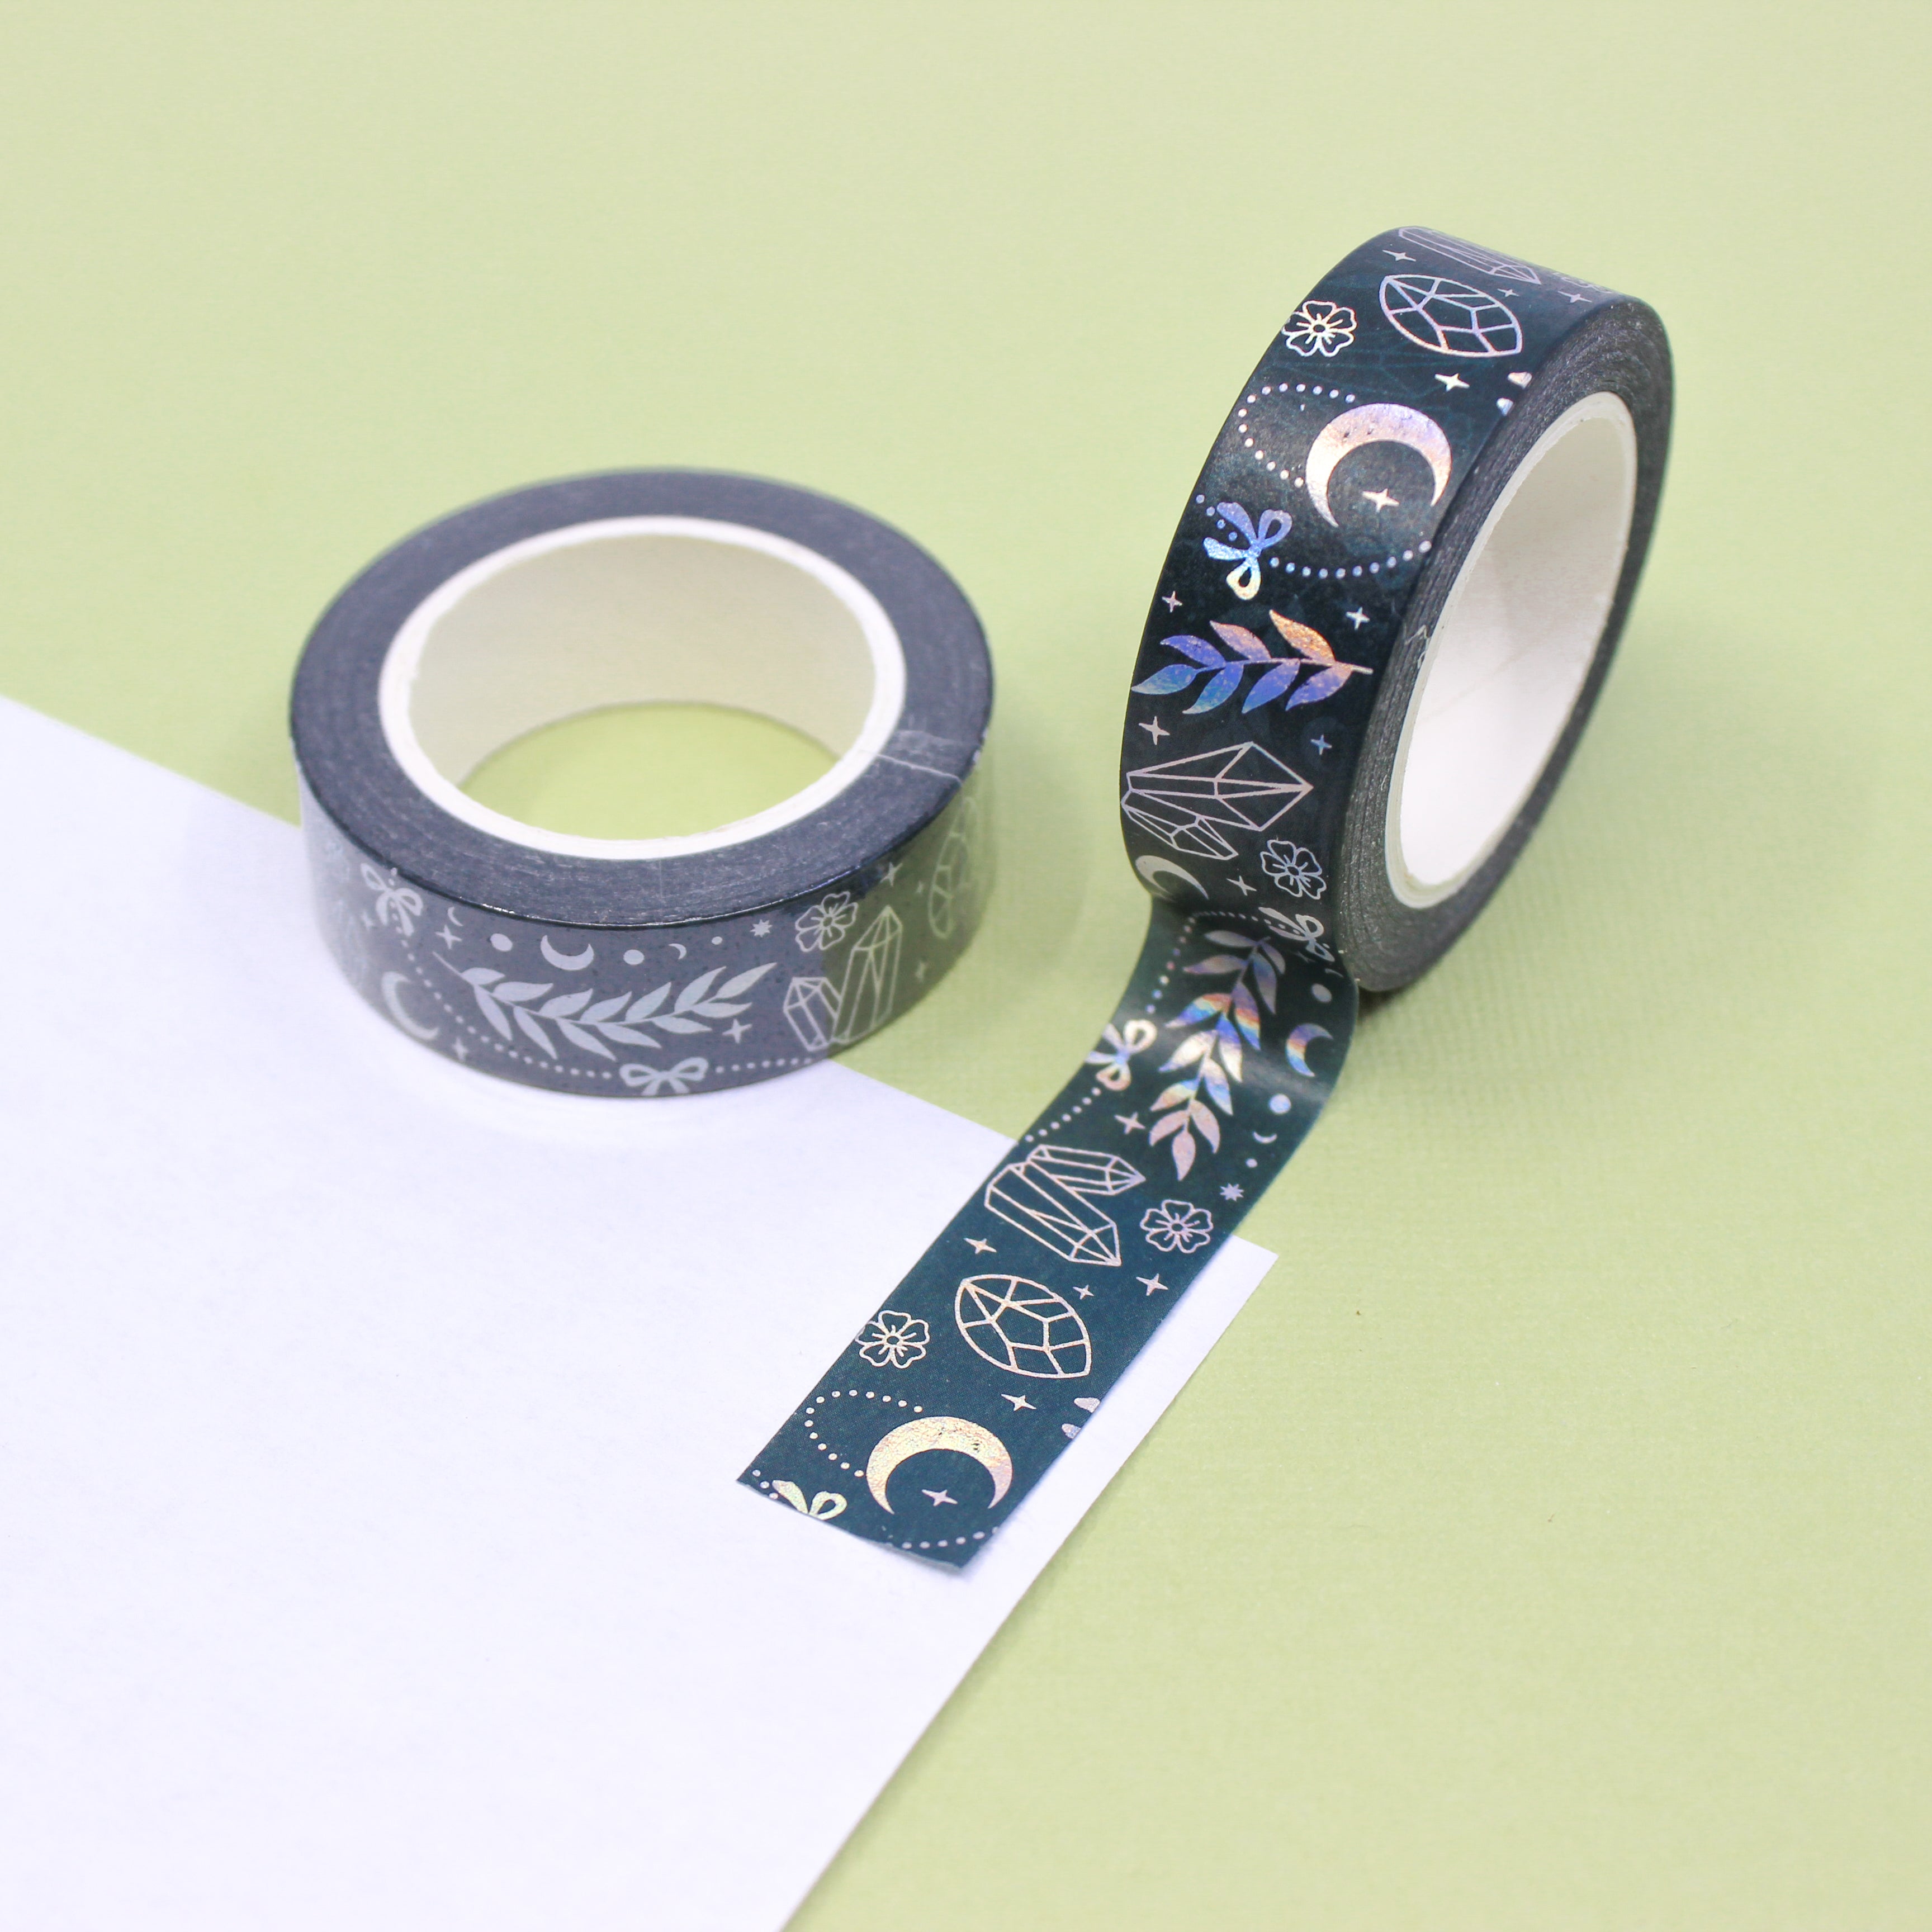 This is silver crystals and celestial points mystical symbols pattern washi tape from BBB Supplies Craft Shop